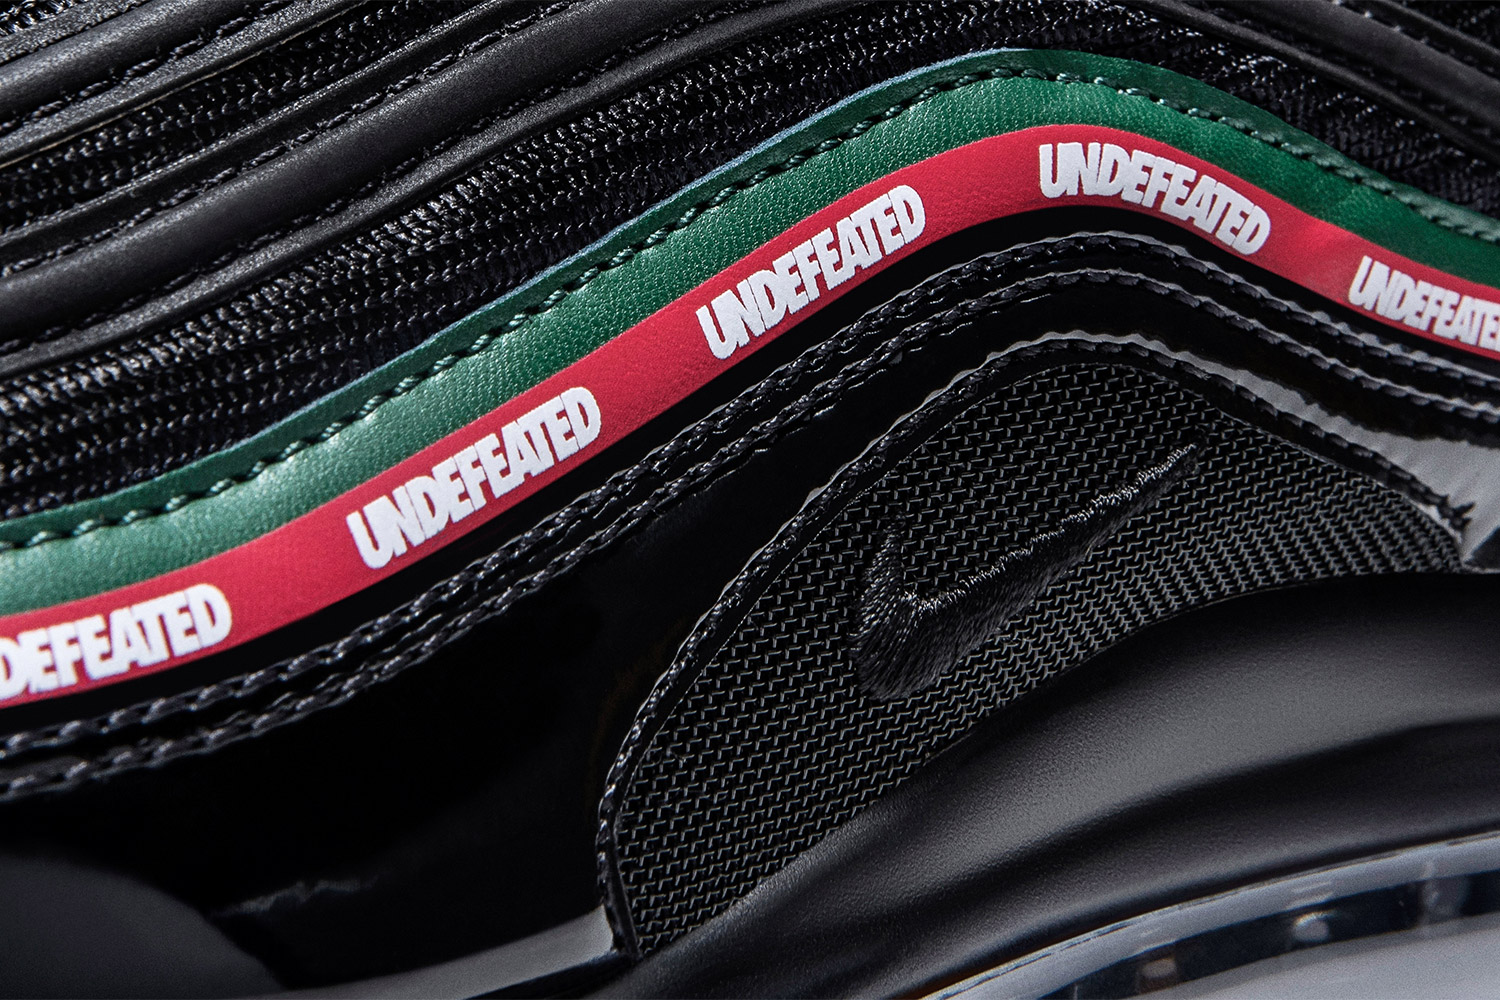 nike-air-max-97-undefeated-official-04.jpg